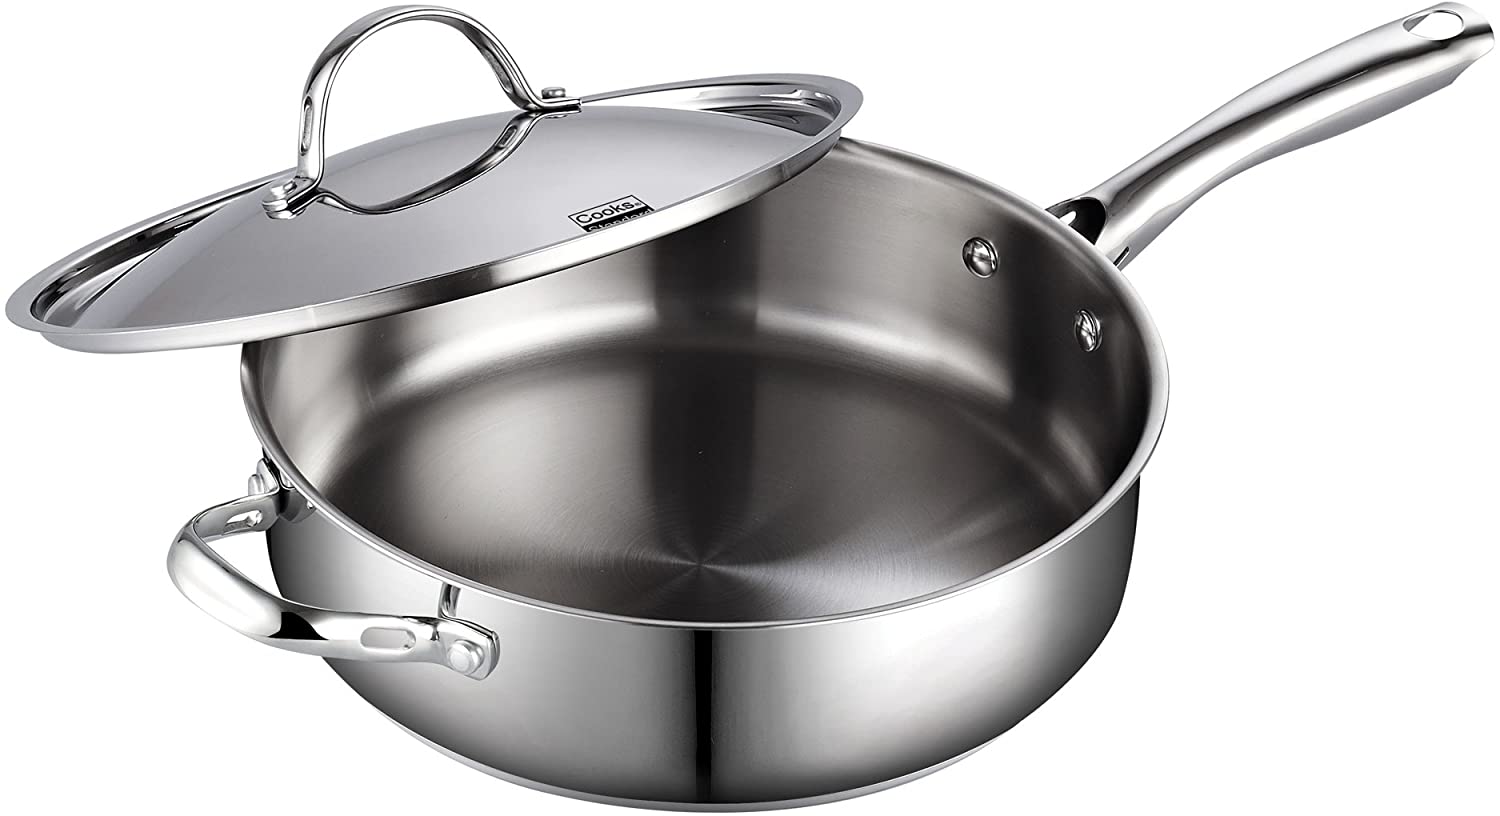 Classic Stainless Steel Saute Pan with Lid